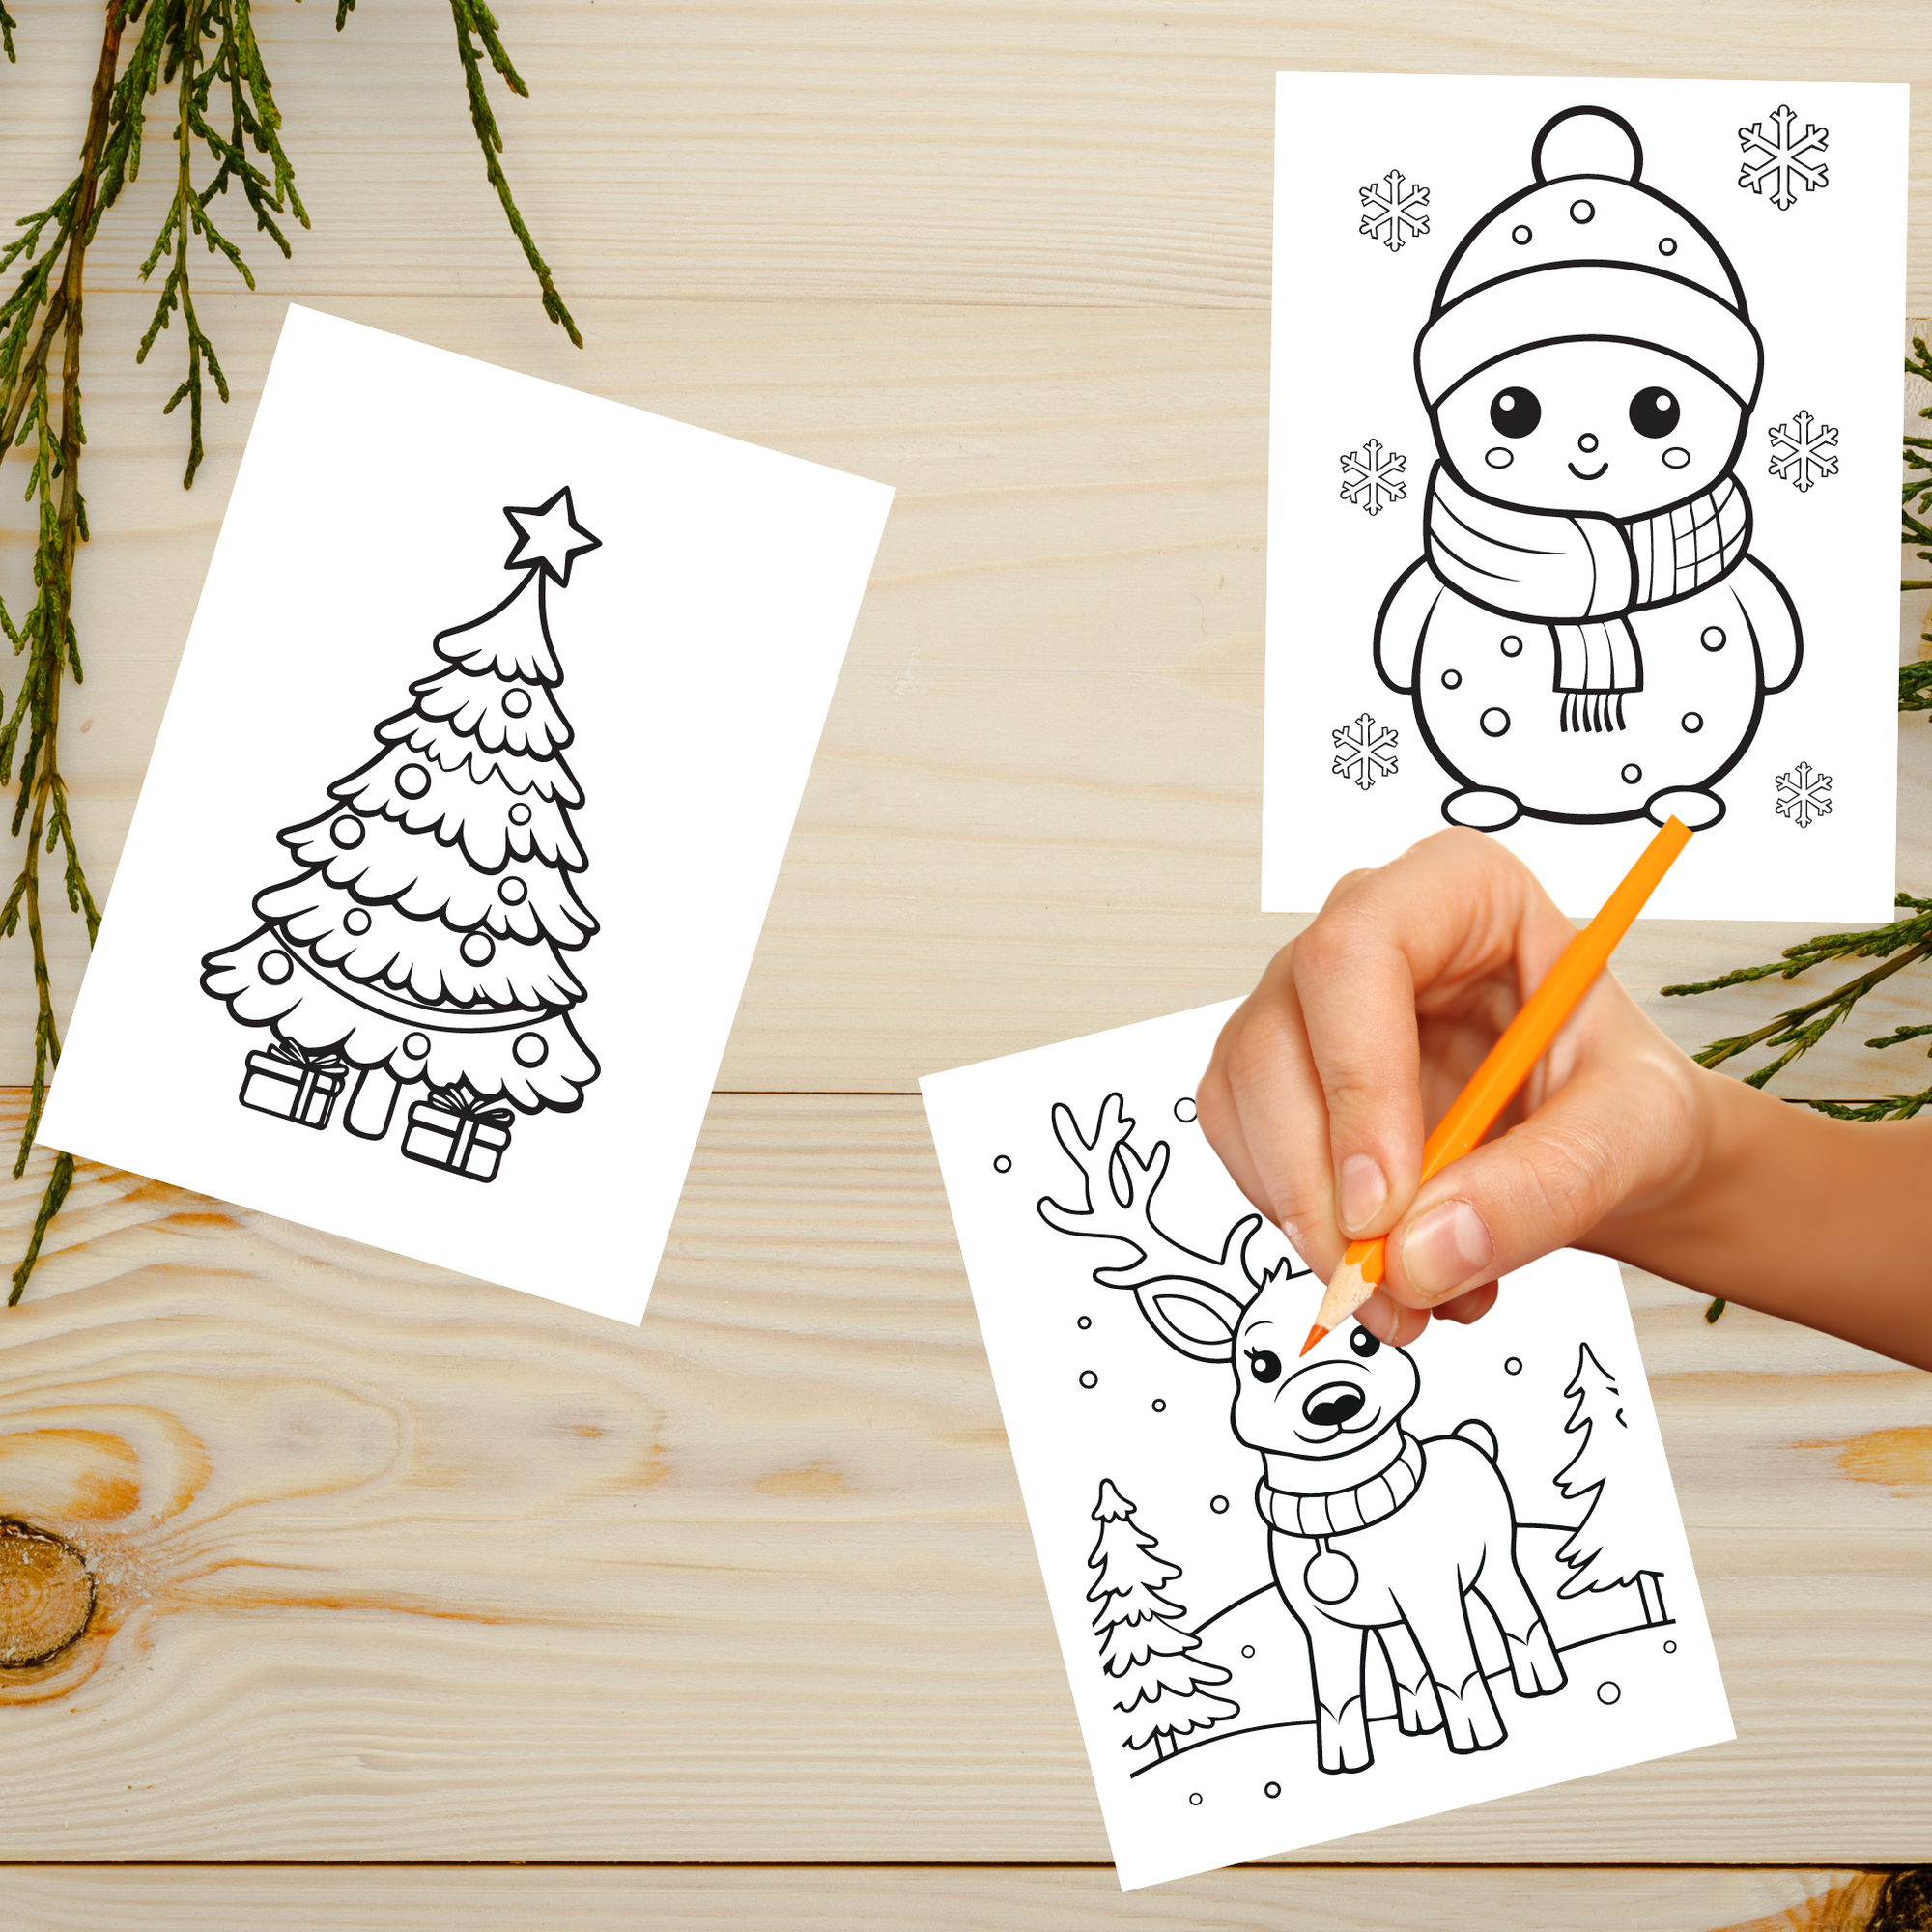 Experience 12 Days of Christmas Activity Downloads for FREE!